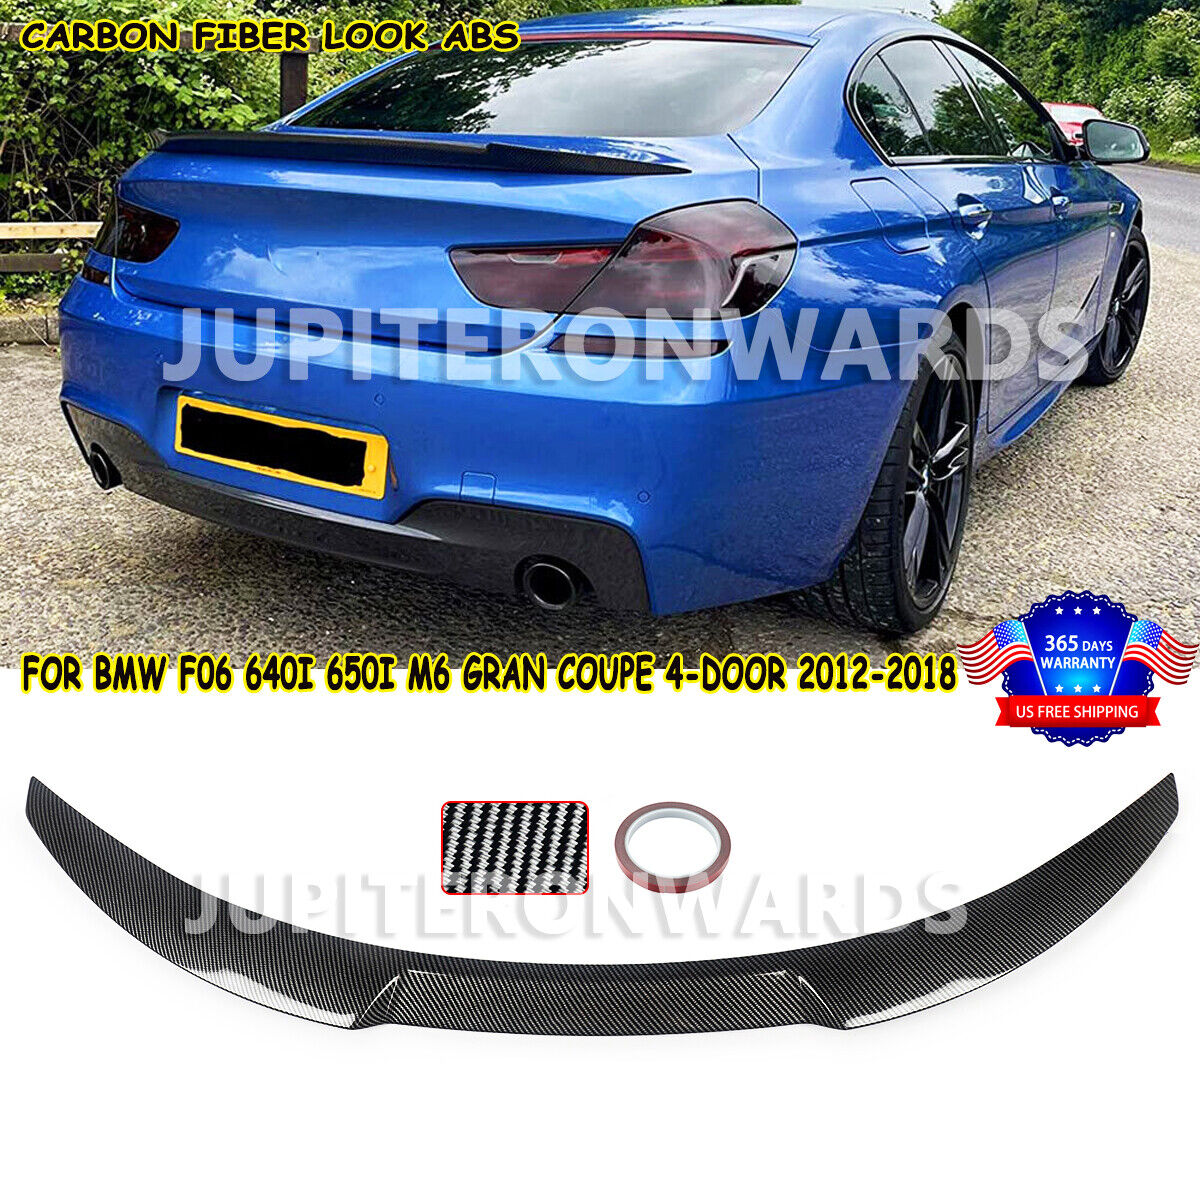 For BMW F06 640i 650i M6 Gran Coupe 4-Door 2012-2018 Duckbill Rear Spoiler Wing